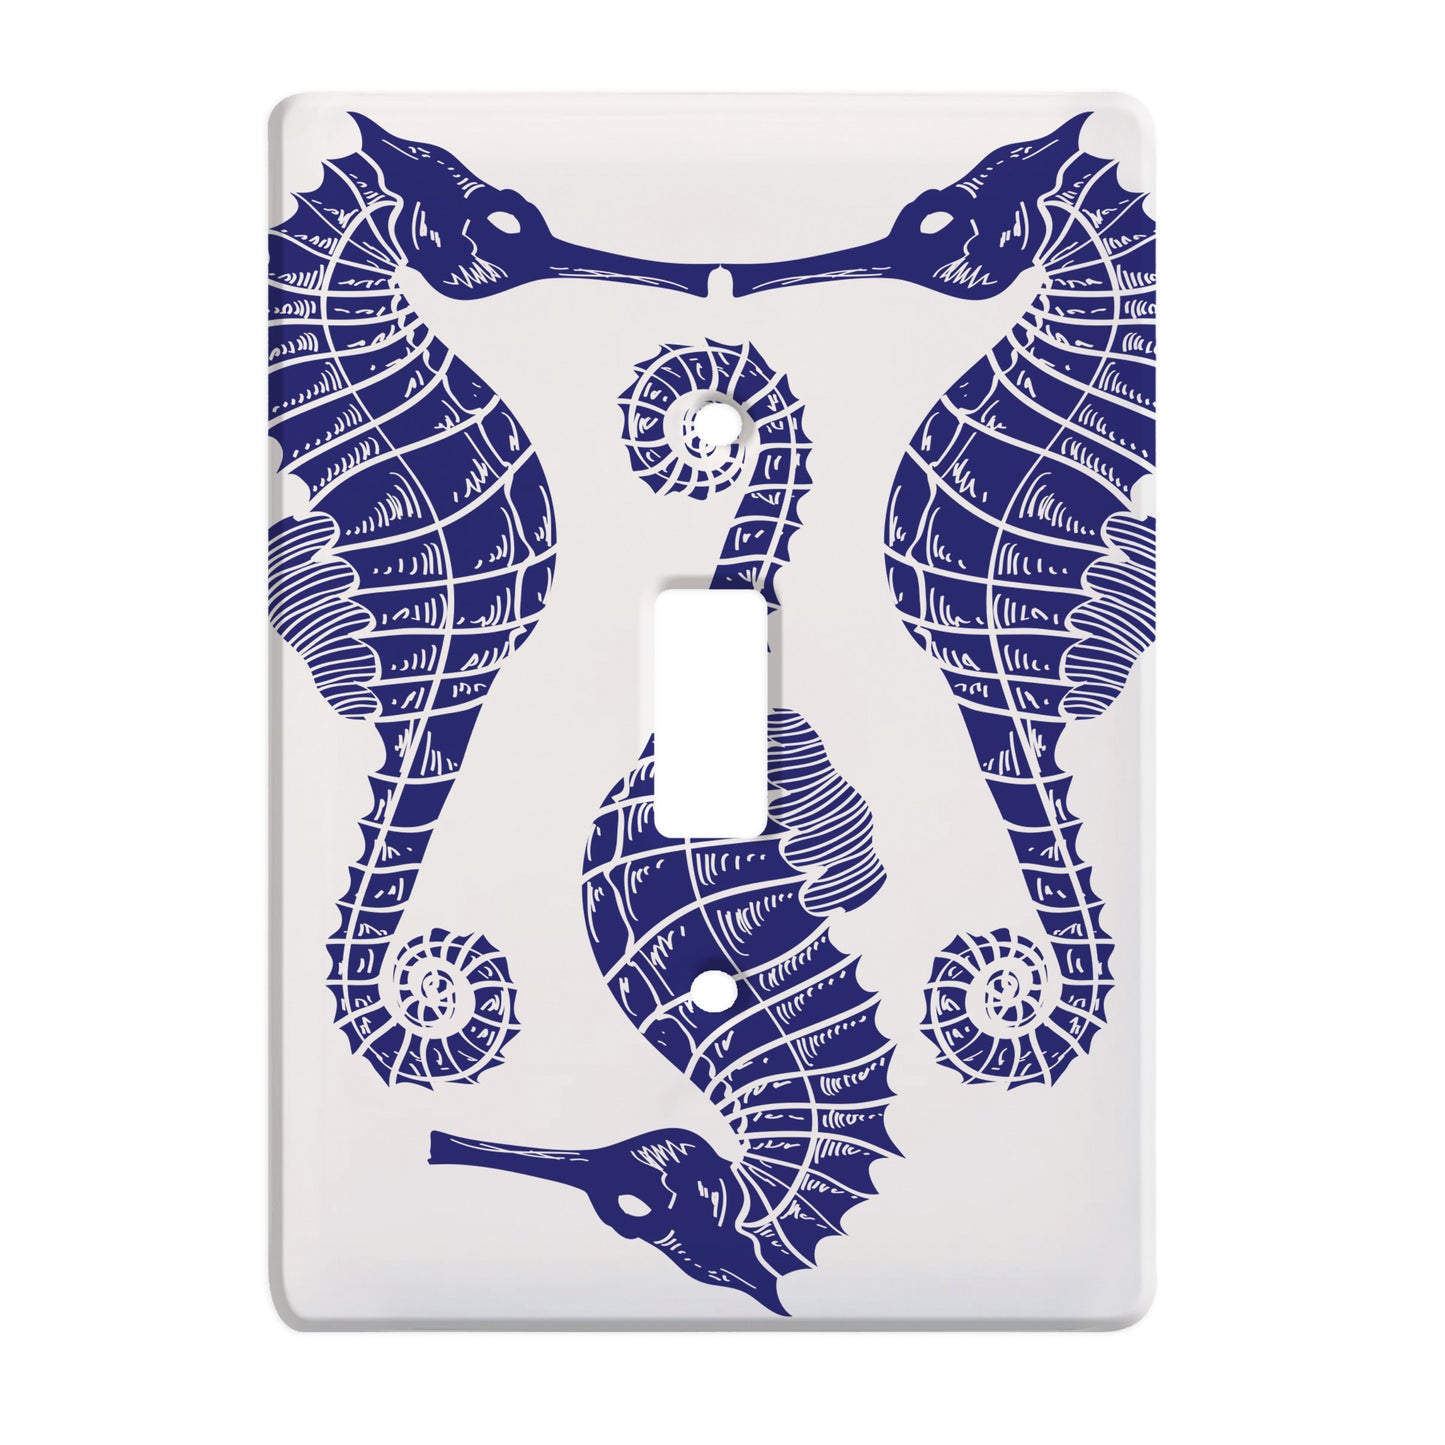 ceramic white single toggle switch plate featuring alternating blue seahorse pattern.